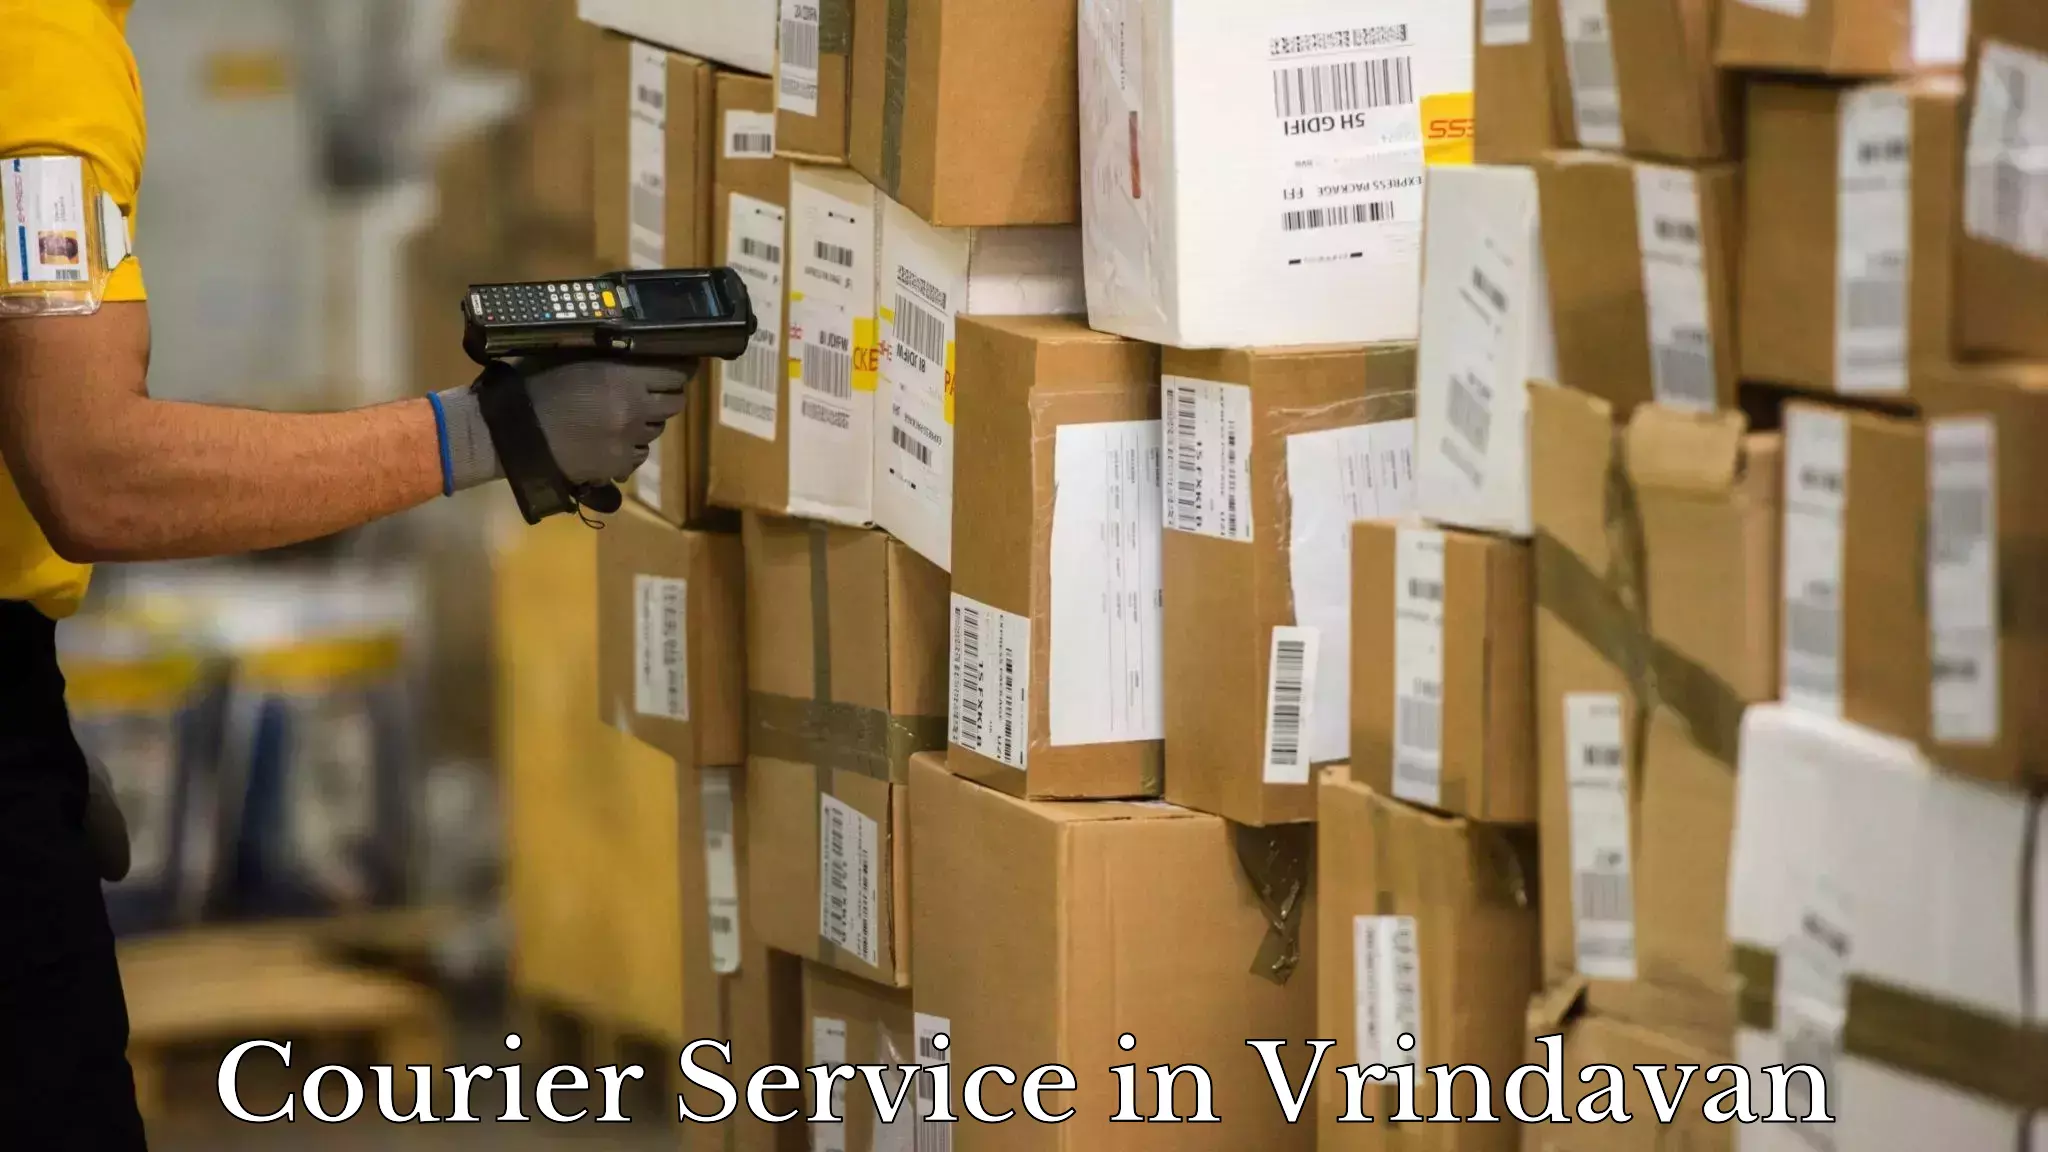 Round-the-clock parcel delivery in Vrindavan